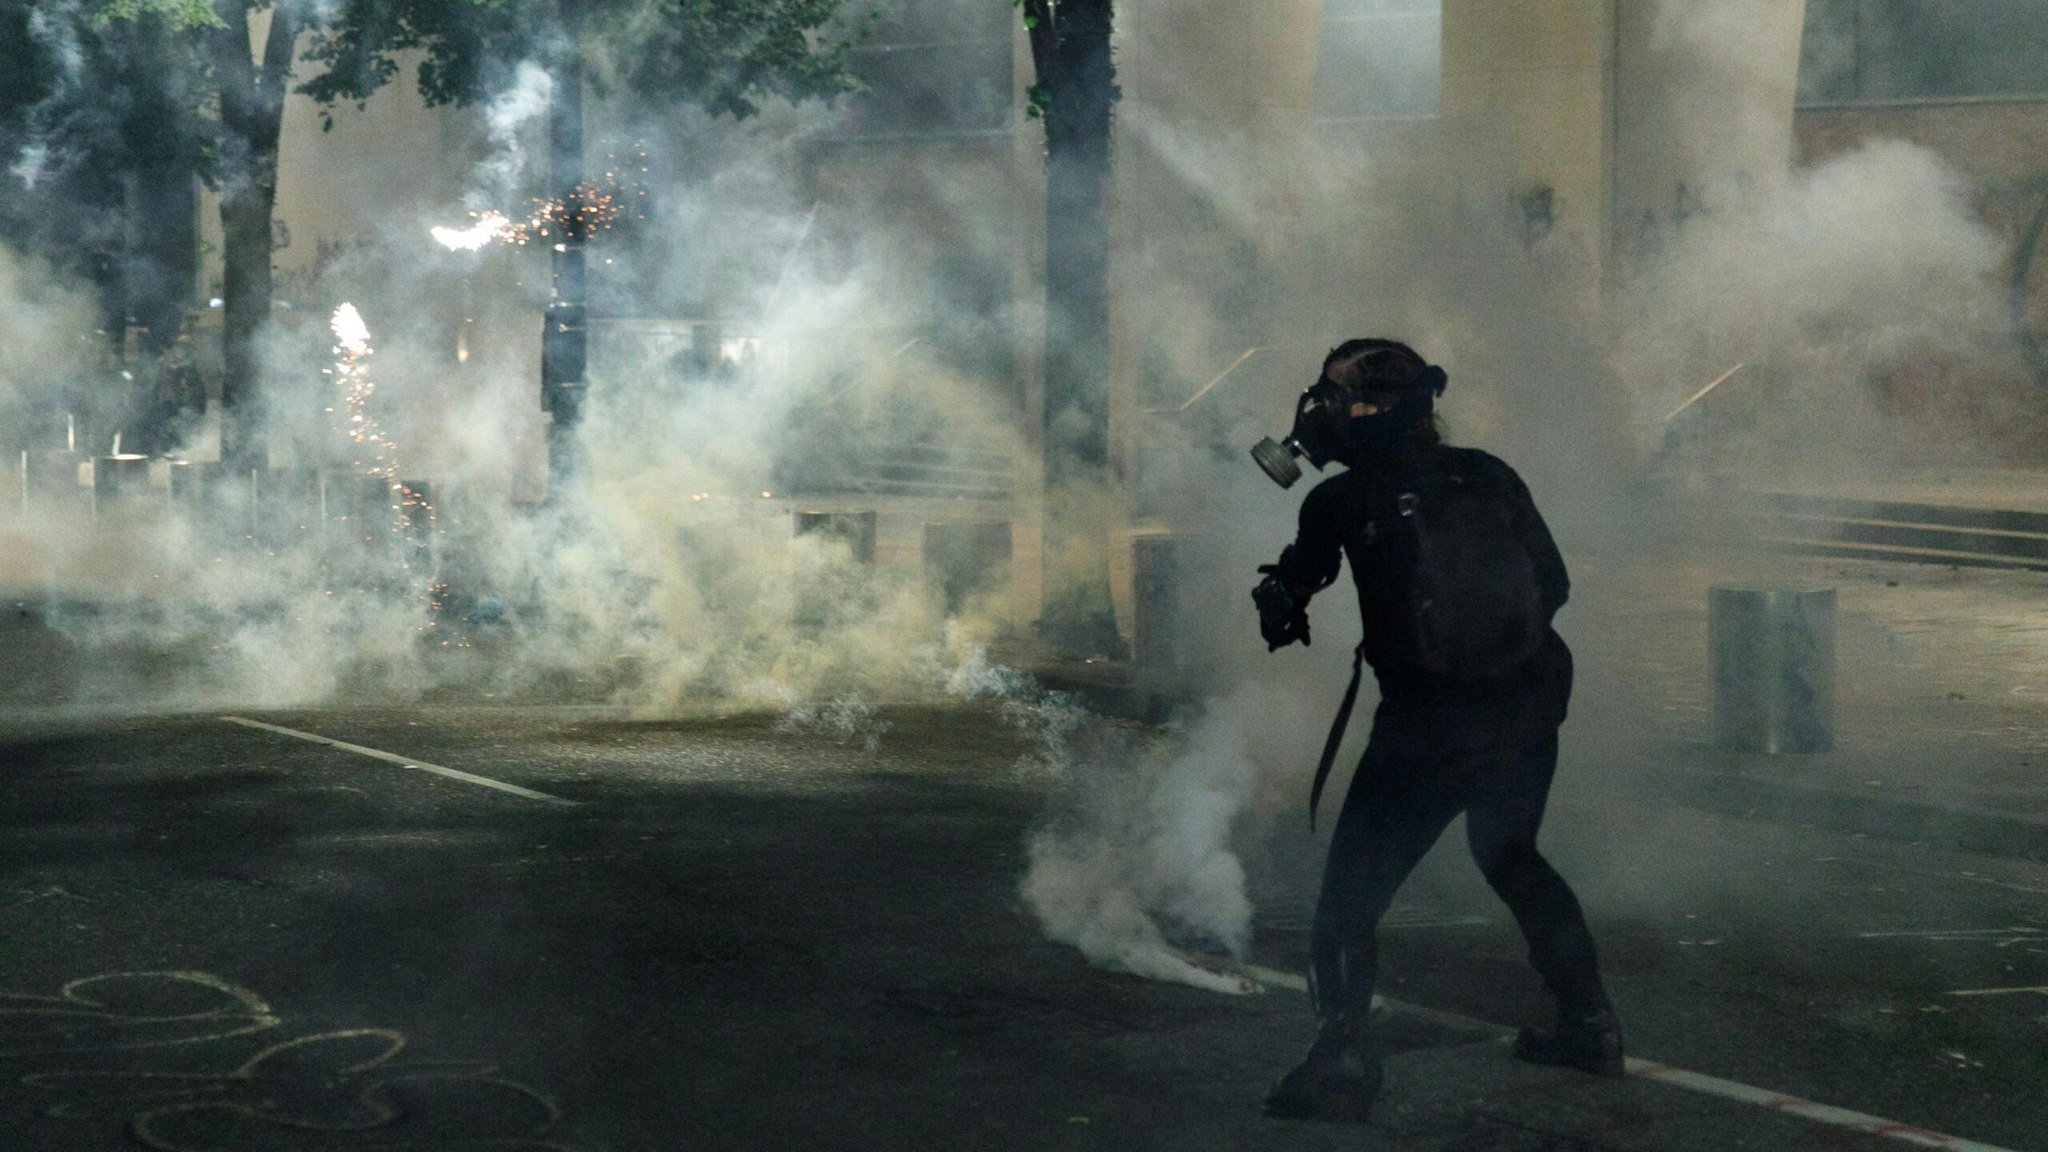 PORTLAND, OREGON, USA: Tear gas and fireworks mix as Black Lives Matter supporters demonstrate in Portland, Oregon on July 4, 2020 for the thirty-eighth day in a row at Portland's Justice Center and throughout Portland, with a riot declared about 12.20 am on July 5. CS tear gas and less-lethal weapons were used, and multiple arrests were made. (Photo by John Rudoff/Anadolu Agency via Getty Images)